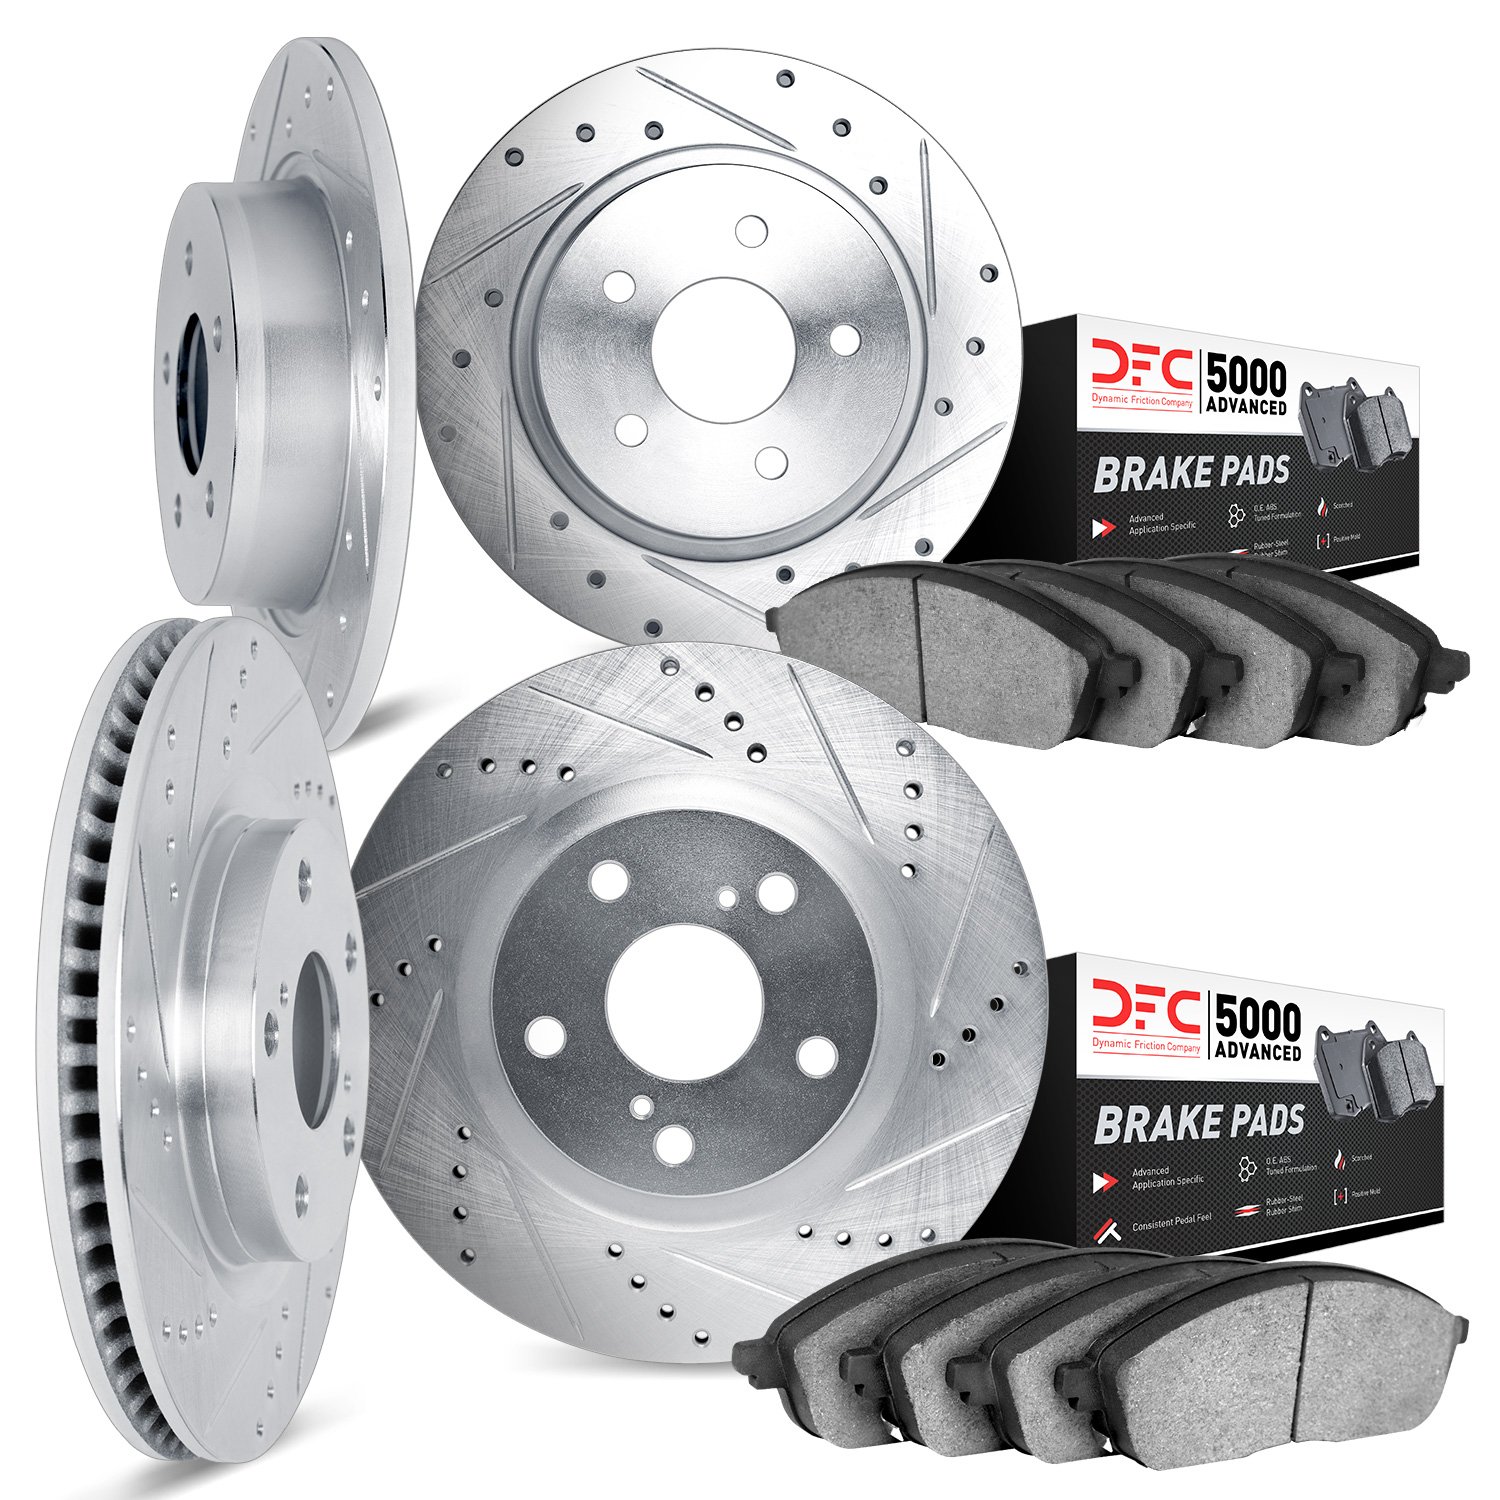 7504-54396 Drilled/Slotted Brake Rotors w/5000 Advanced Brake Pads Kit [Silver], 2016-2018 Ford/Lincoln/Mercury/Mazda, Position: